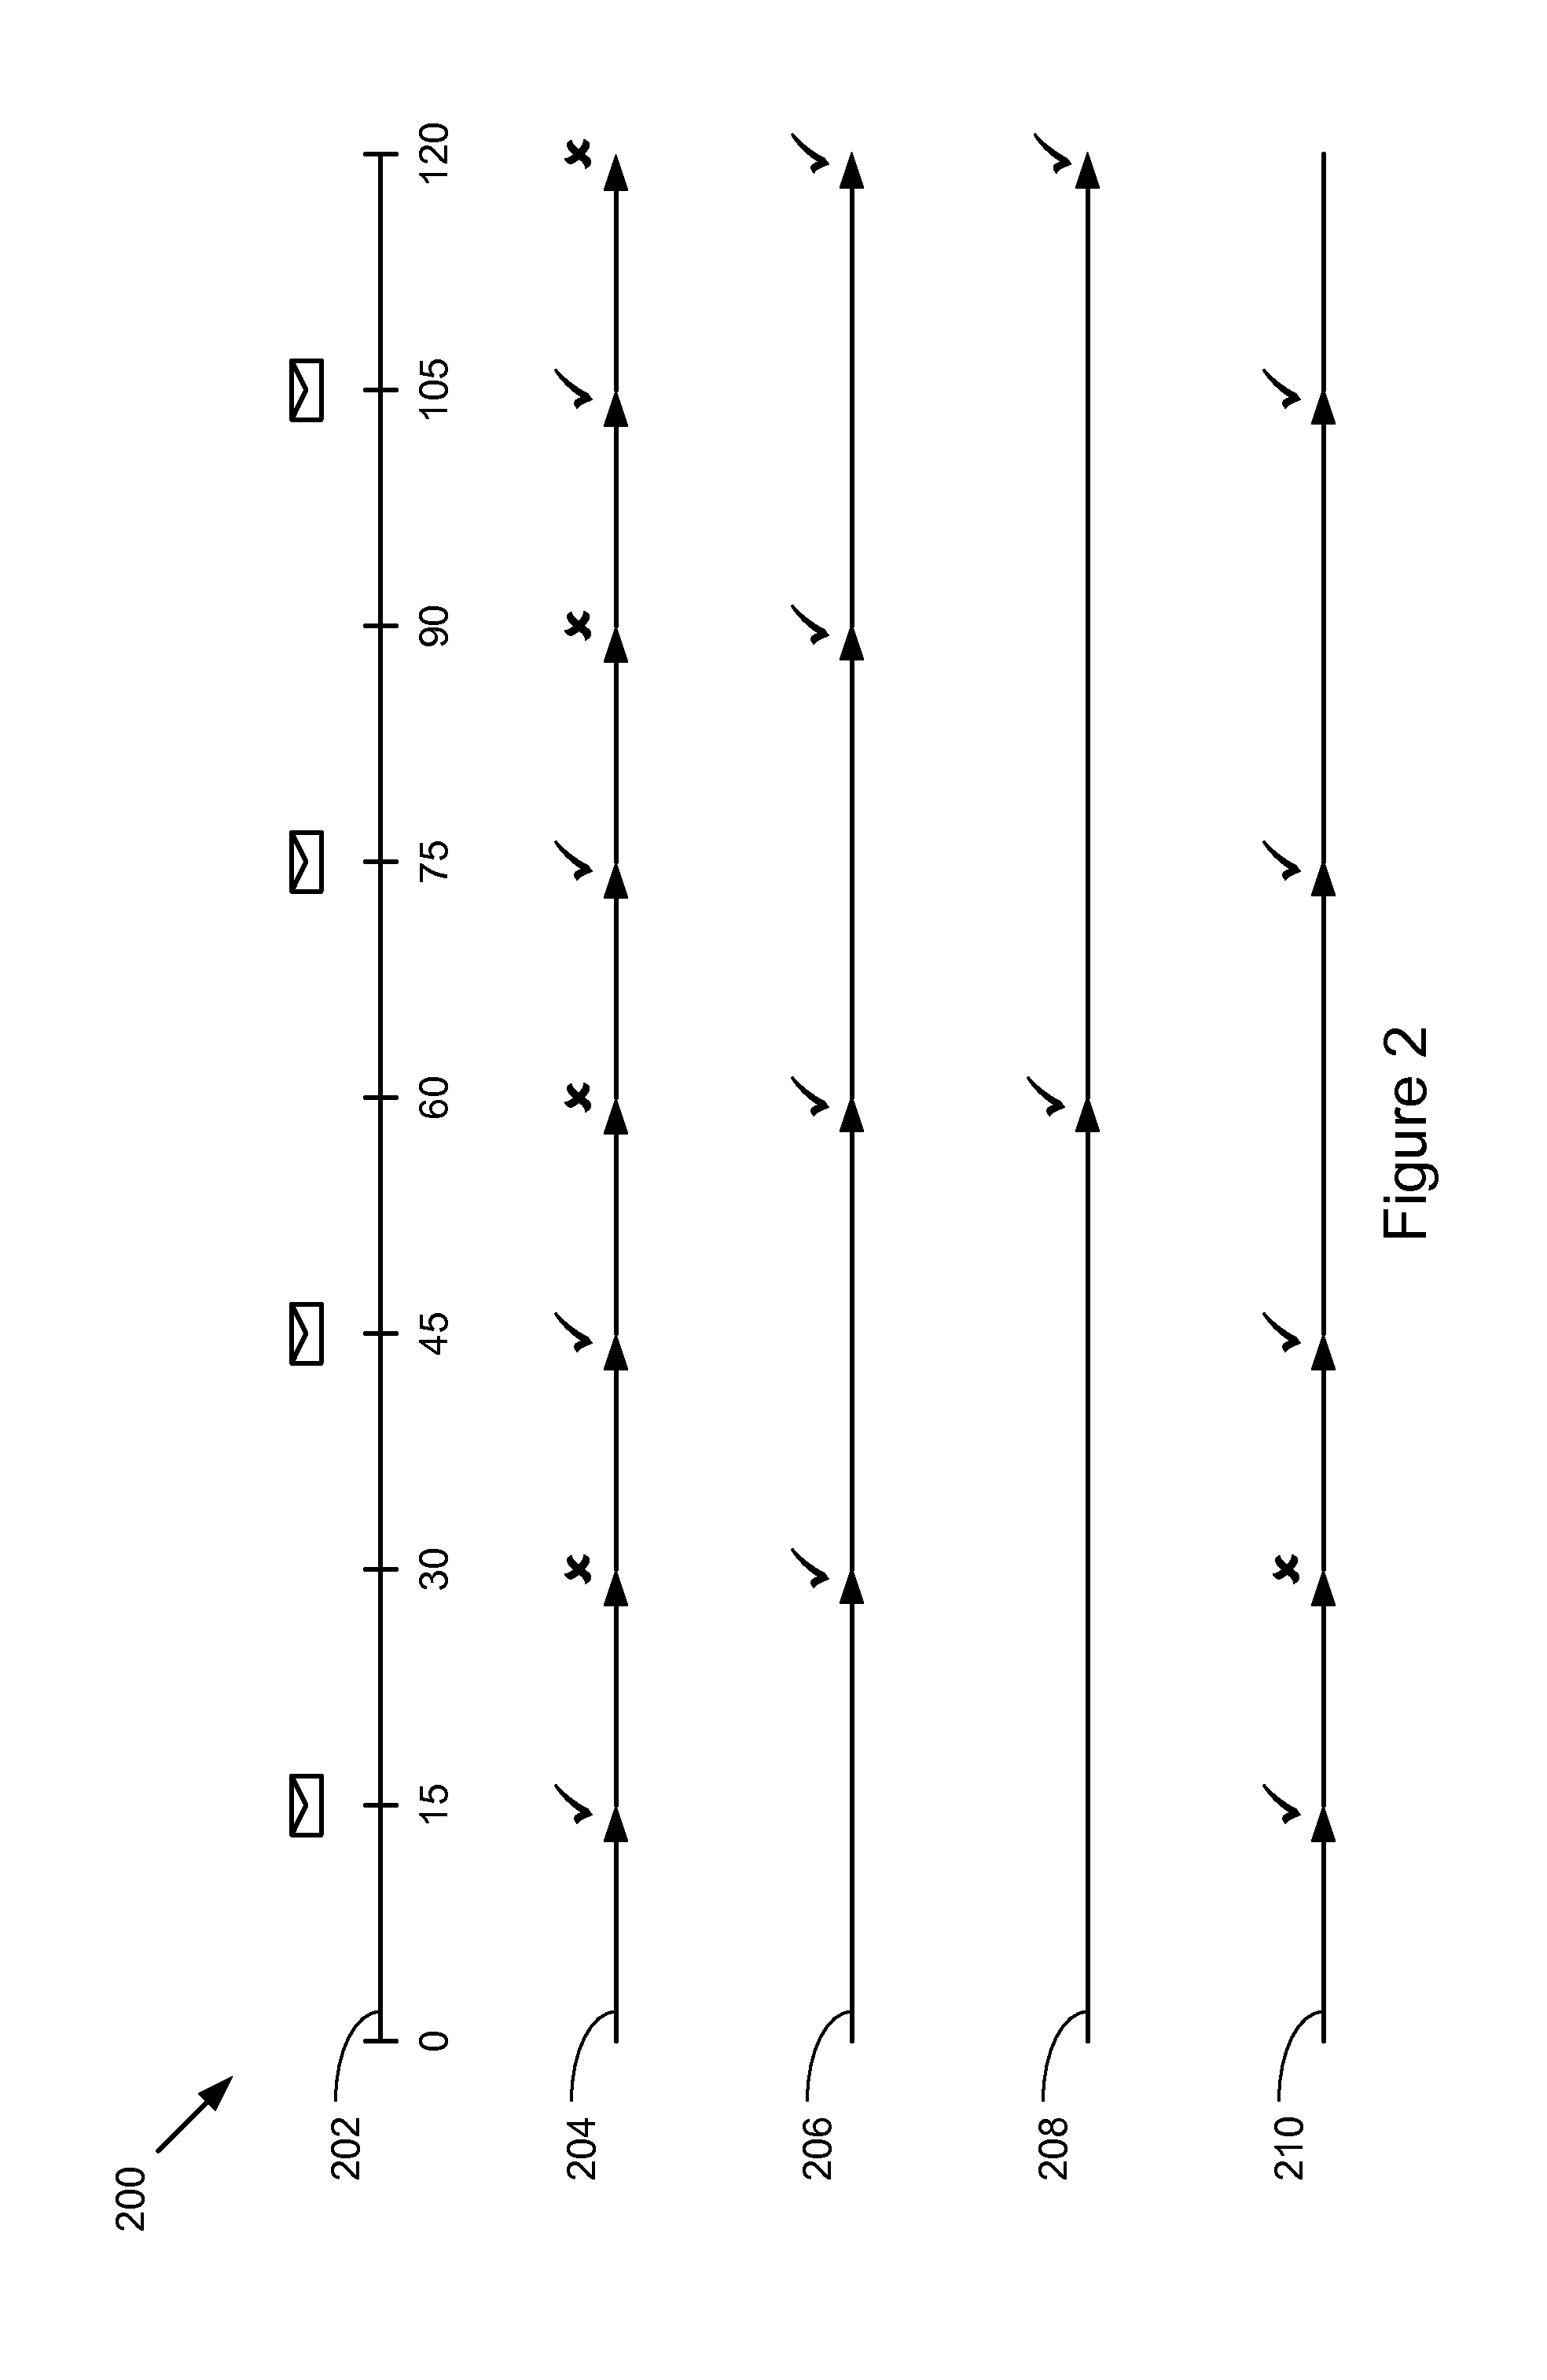 Adaptive timers for polling in a mobile wireless device